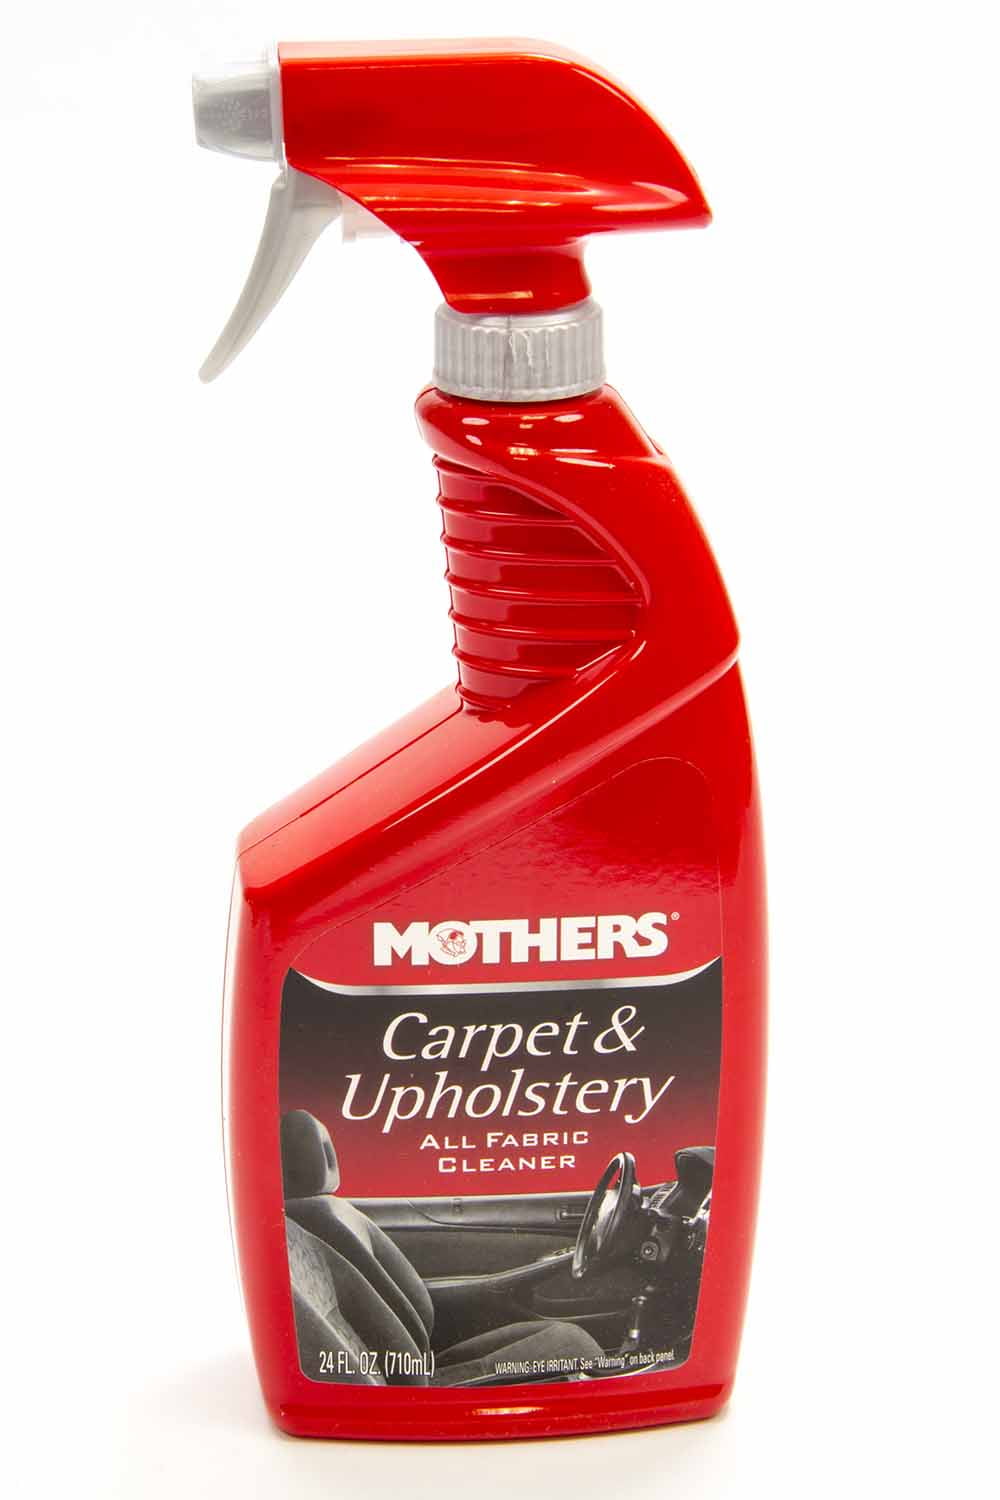  Mothers 05424 Carpet & Upholstery Cleaner - 24 oz. : Automotive